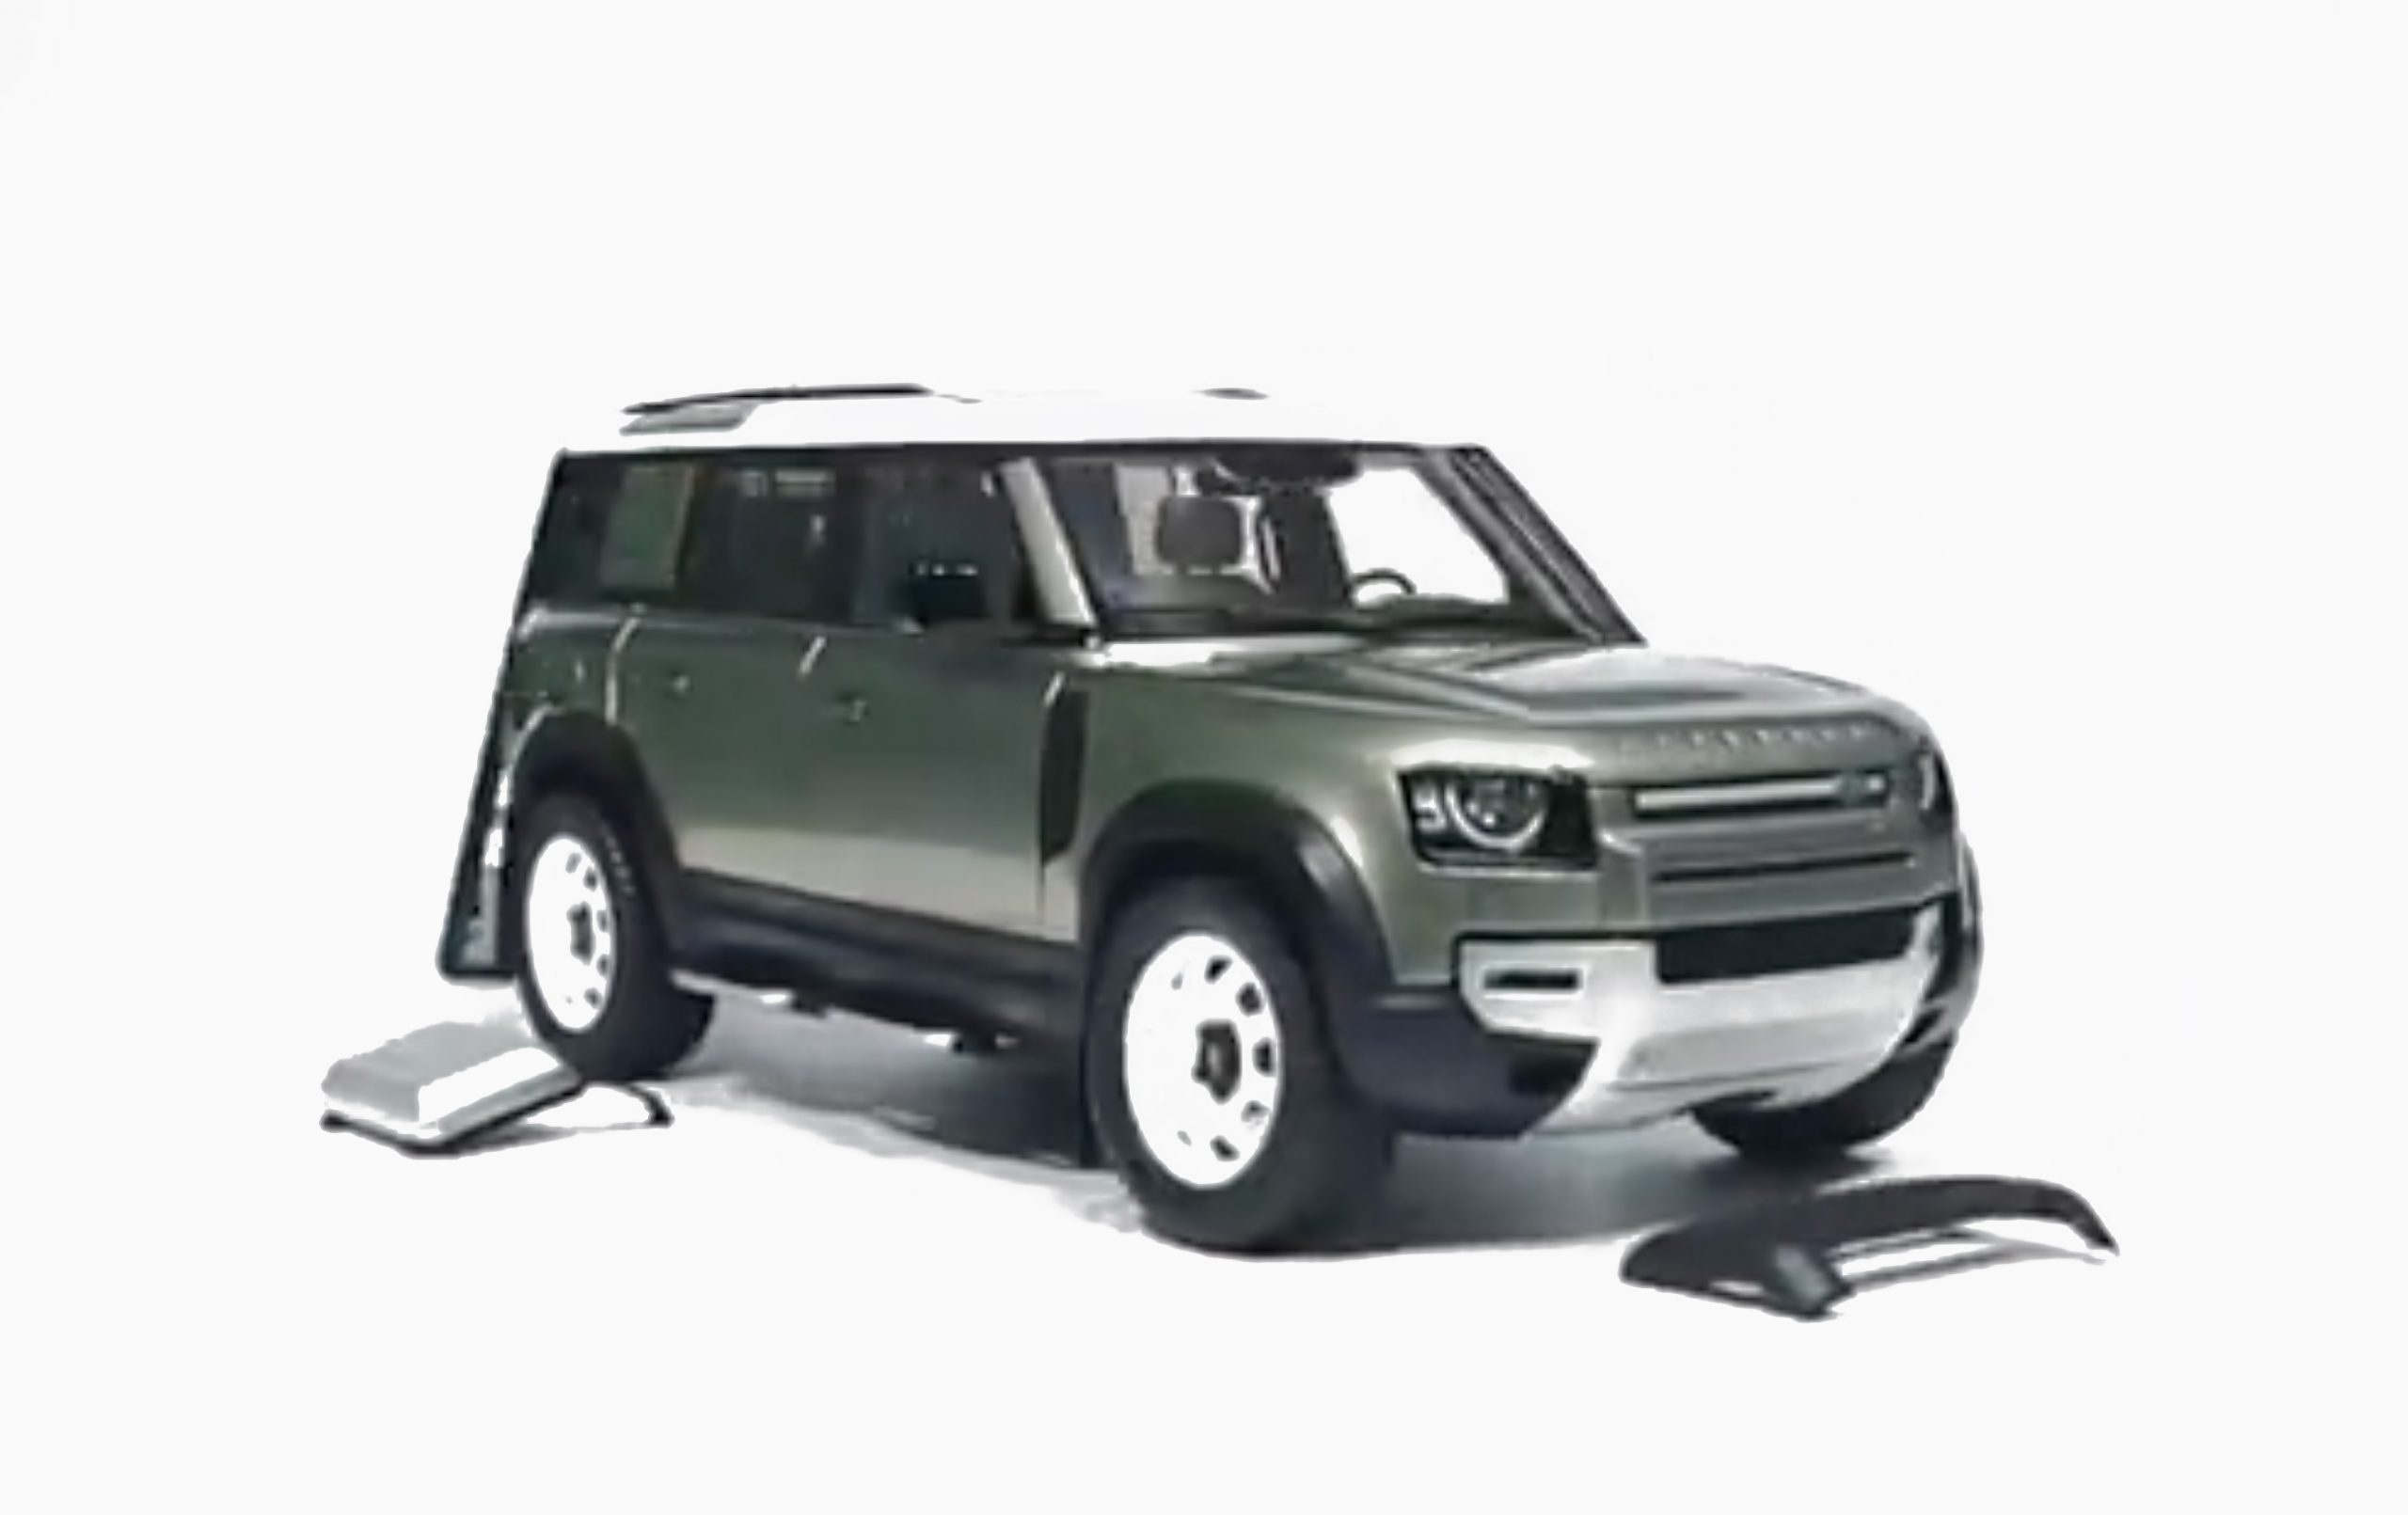 Land Rover Defender 110 with Roof Pack - 2020 - Pangea Green Almost Real 1:18